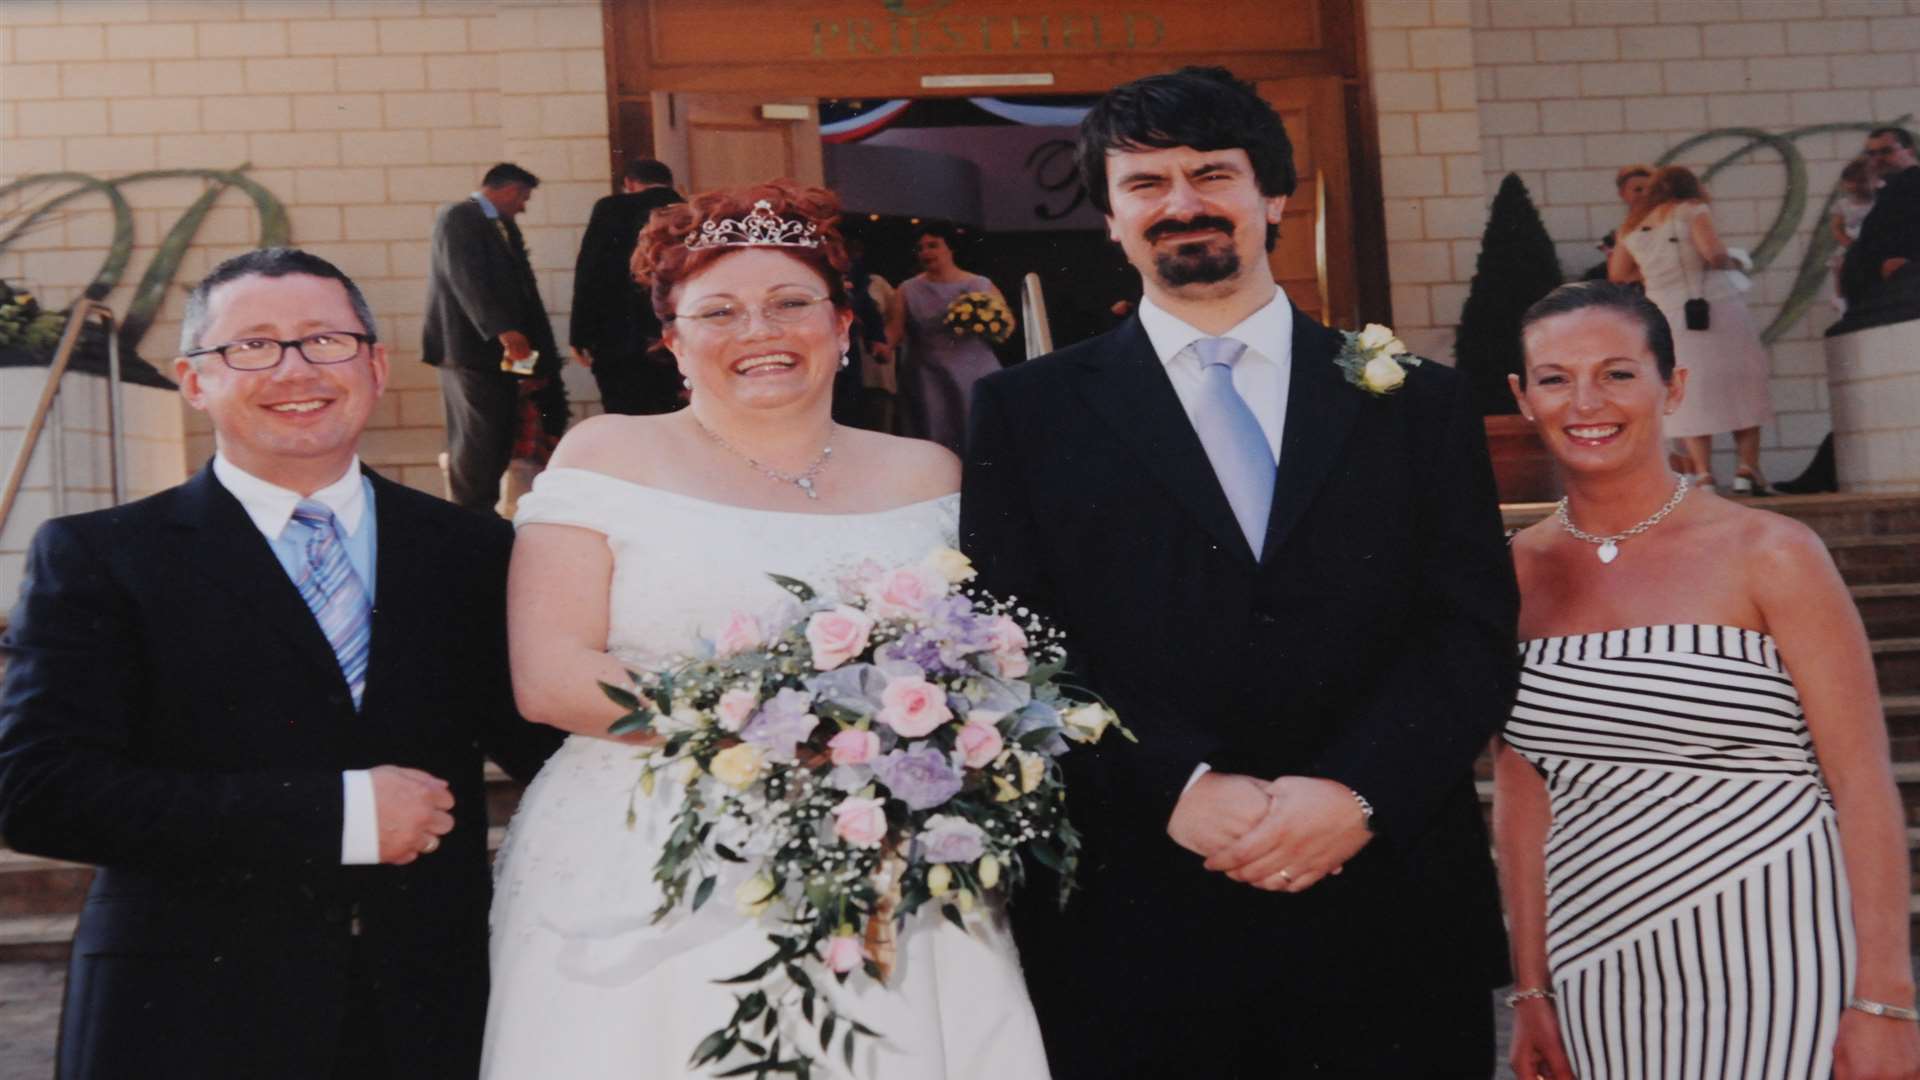 Super Gills fan Peter and Melanie Lloyd on their wedding day with Paul Scally (left)